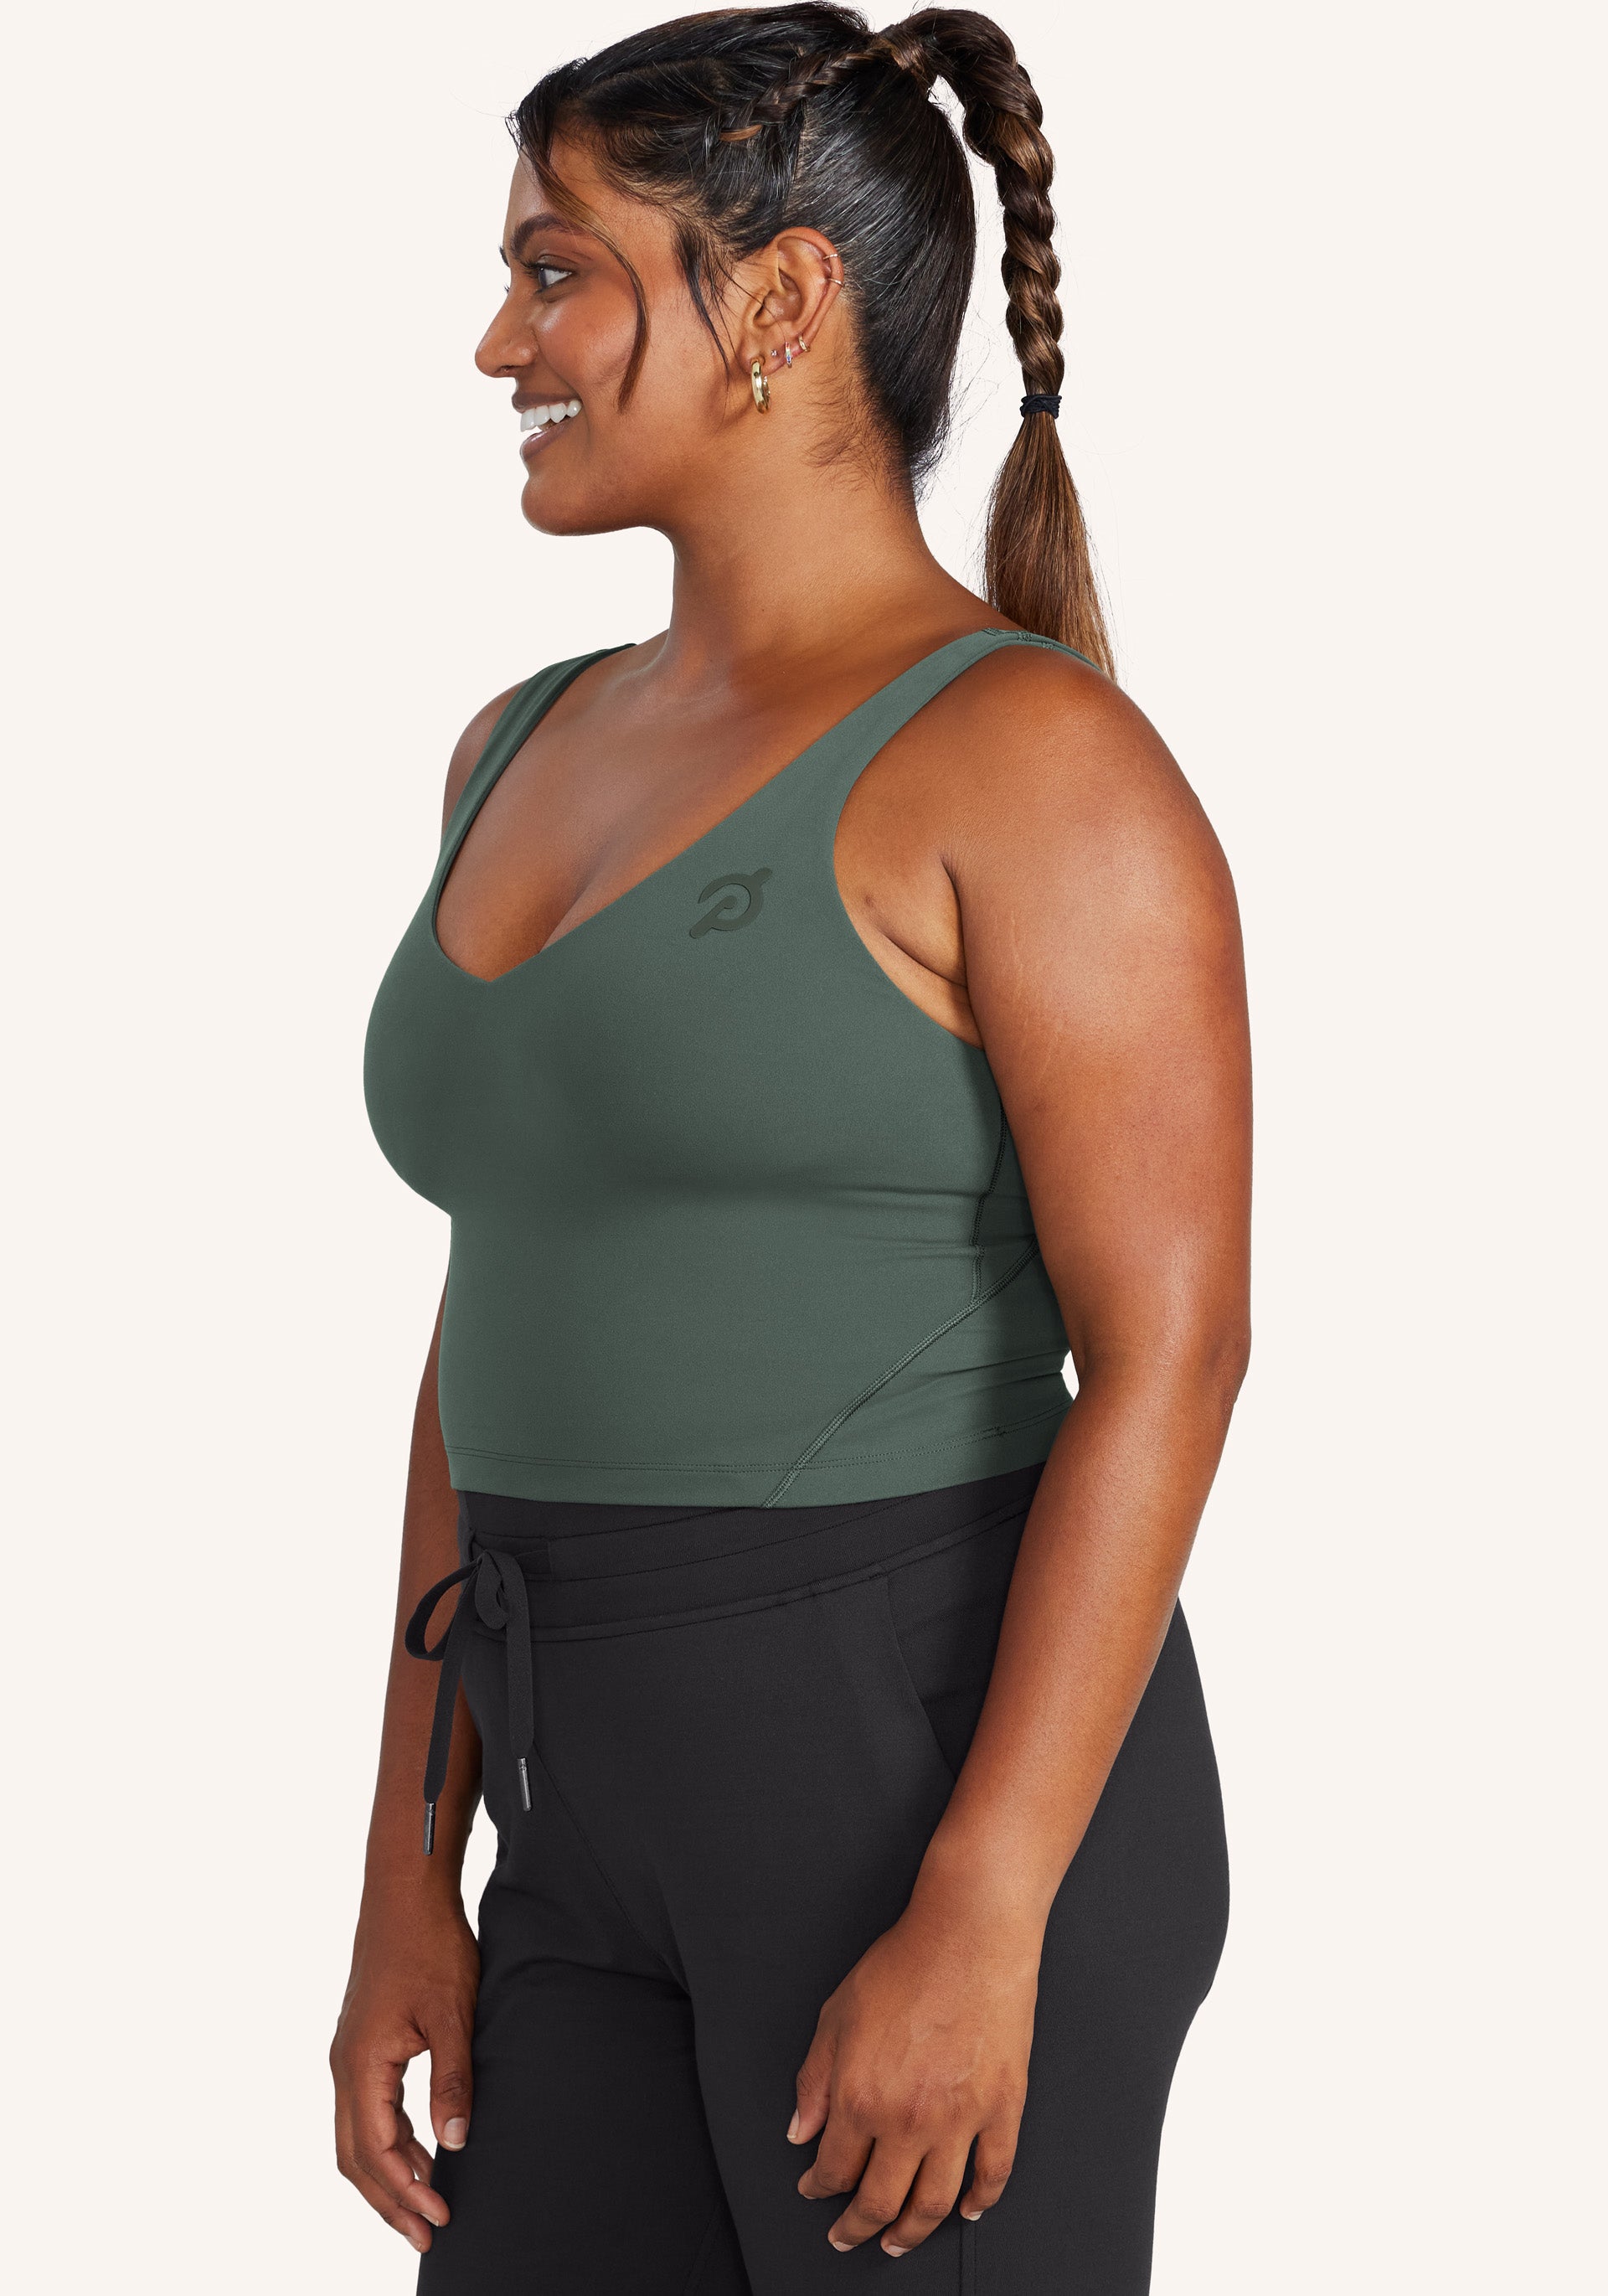 lululemon Desert Hiking Outfit: Align Tank HN in Smoked Spruce